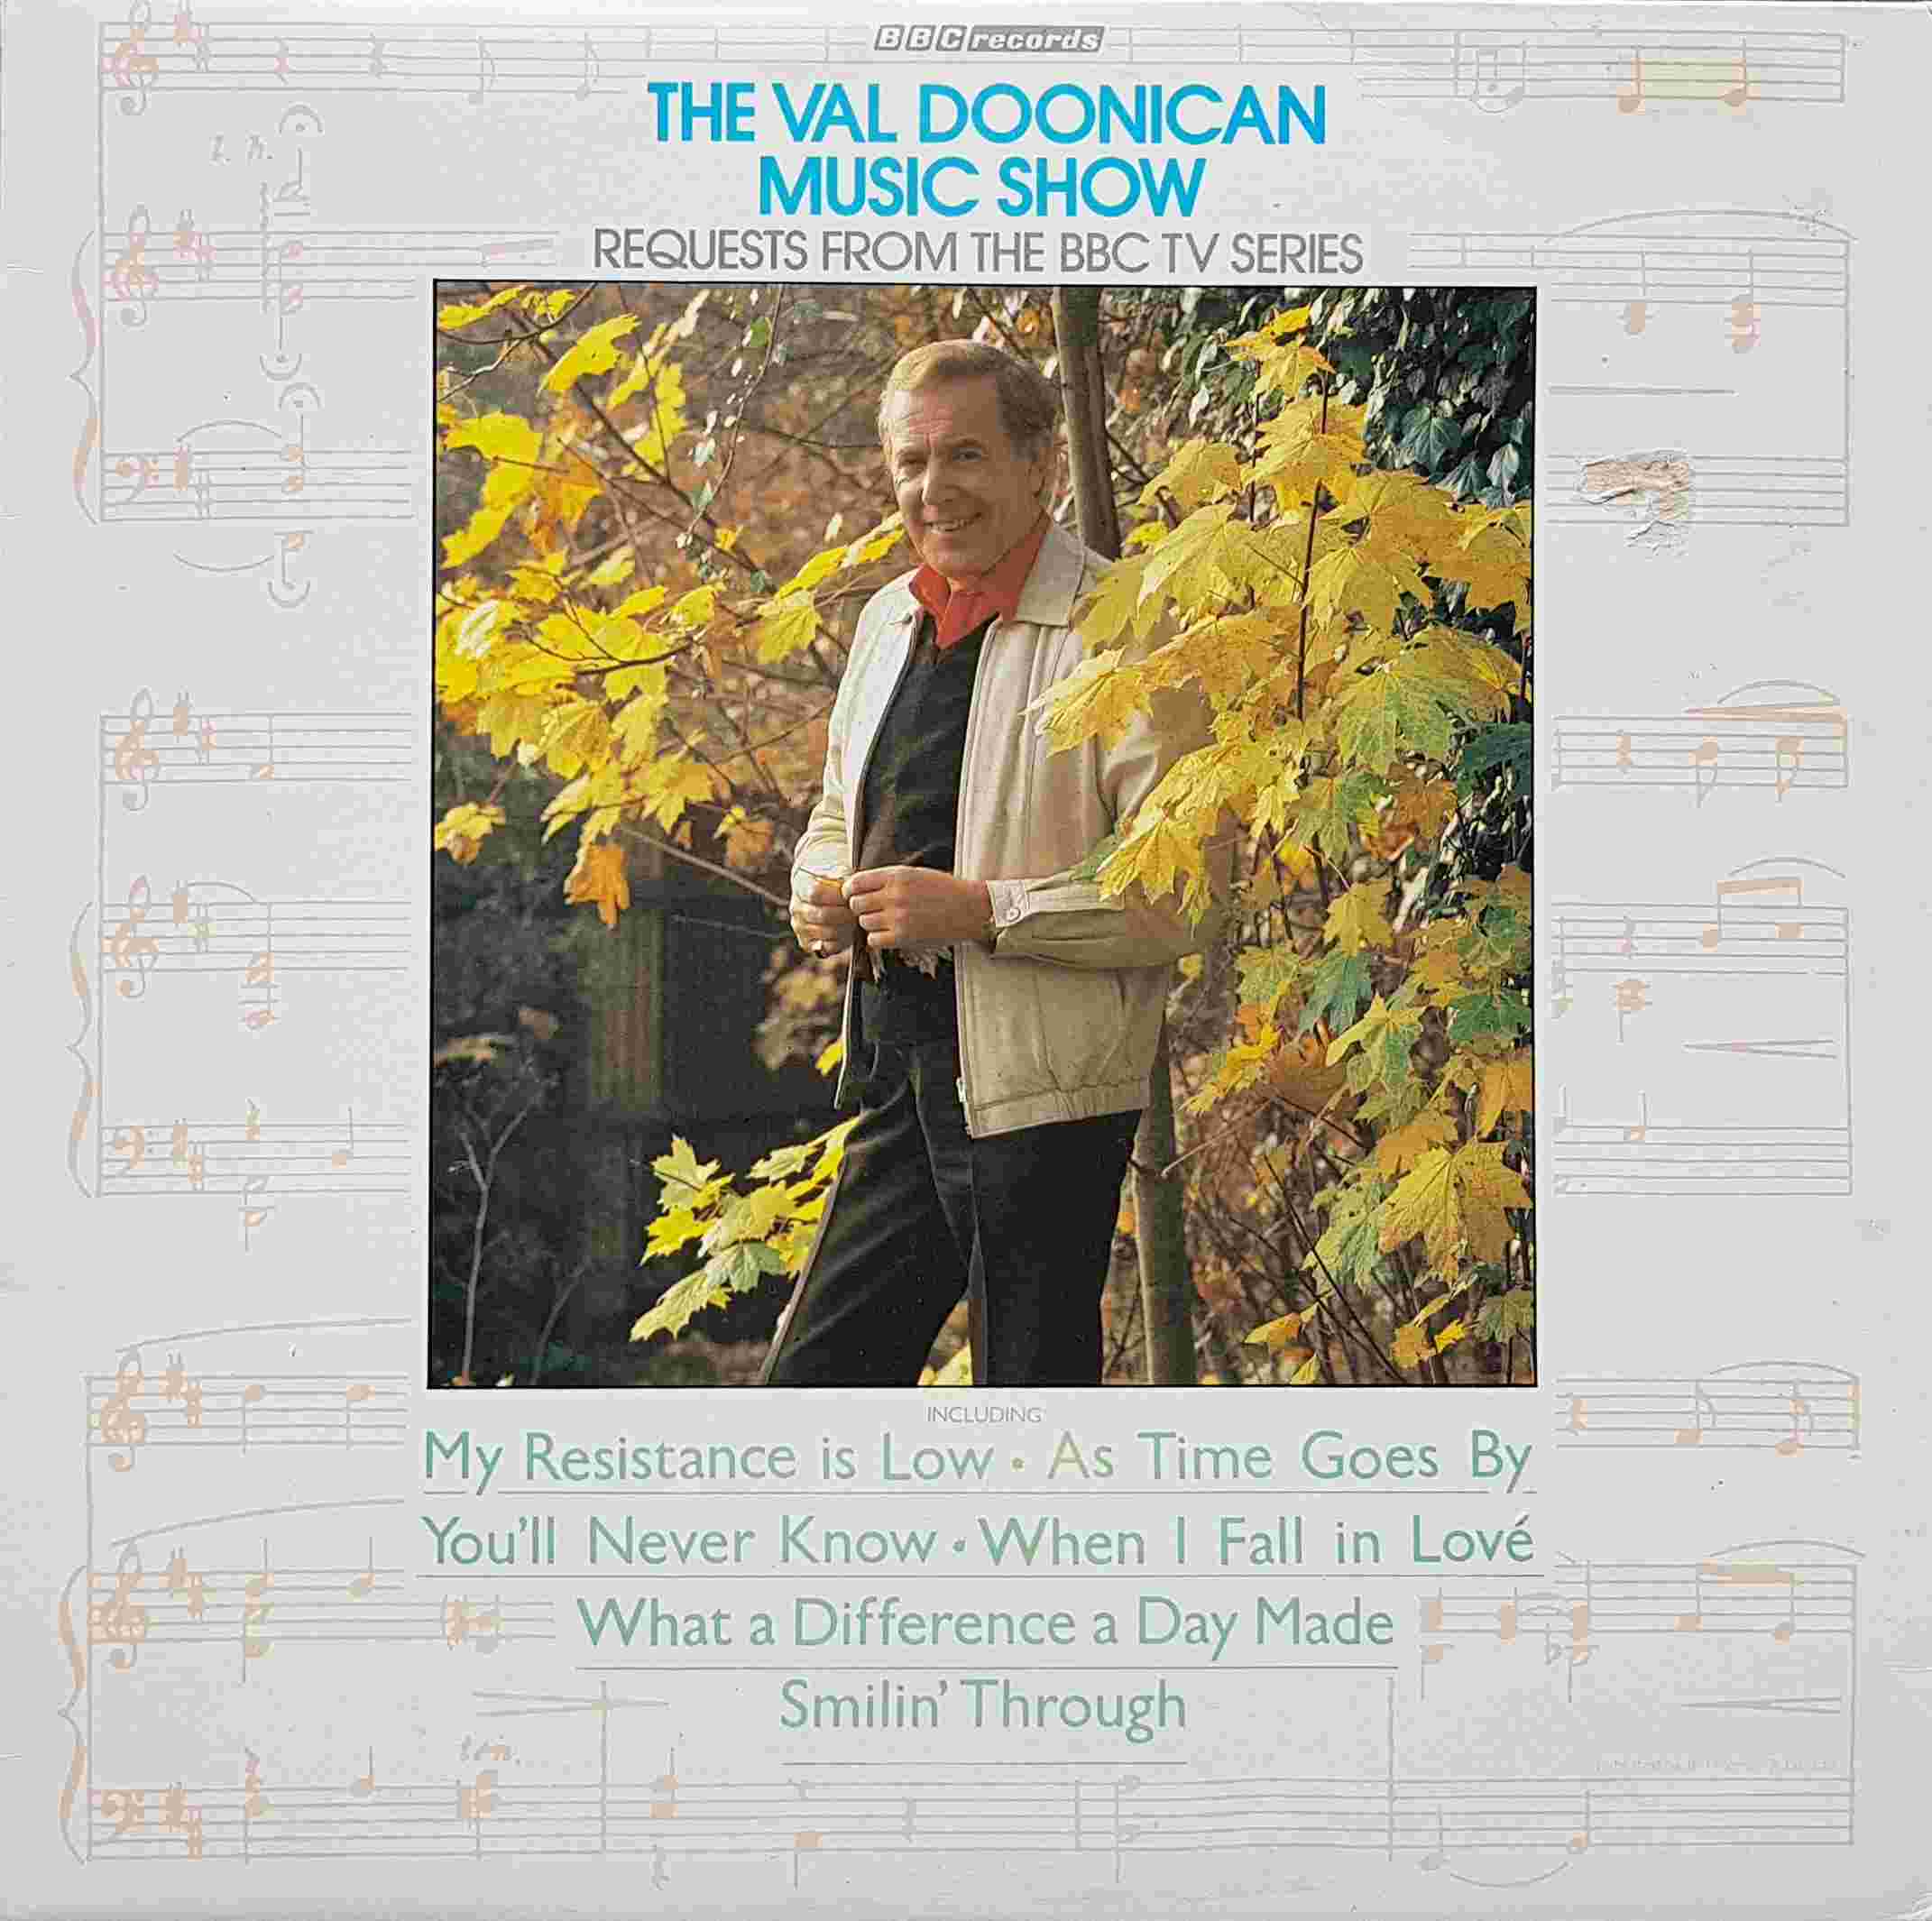 Picture of 823 135-1 The Val Doonican Music Show by artist Various from the BBC albums - Records and Tapes library